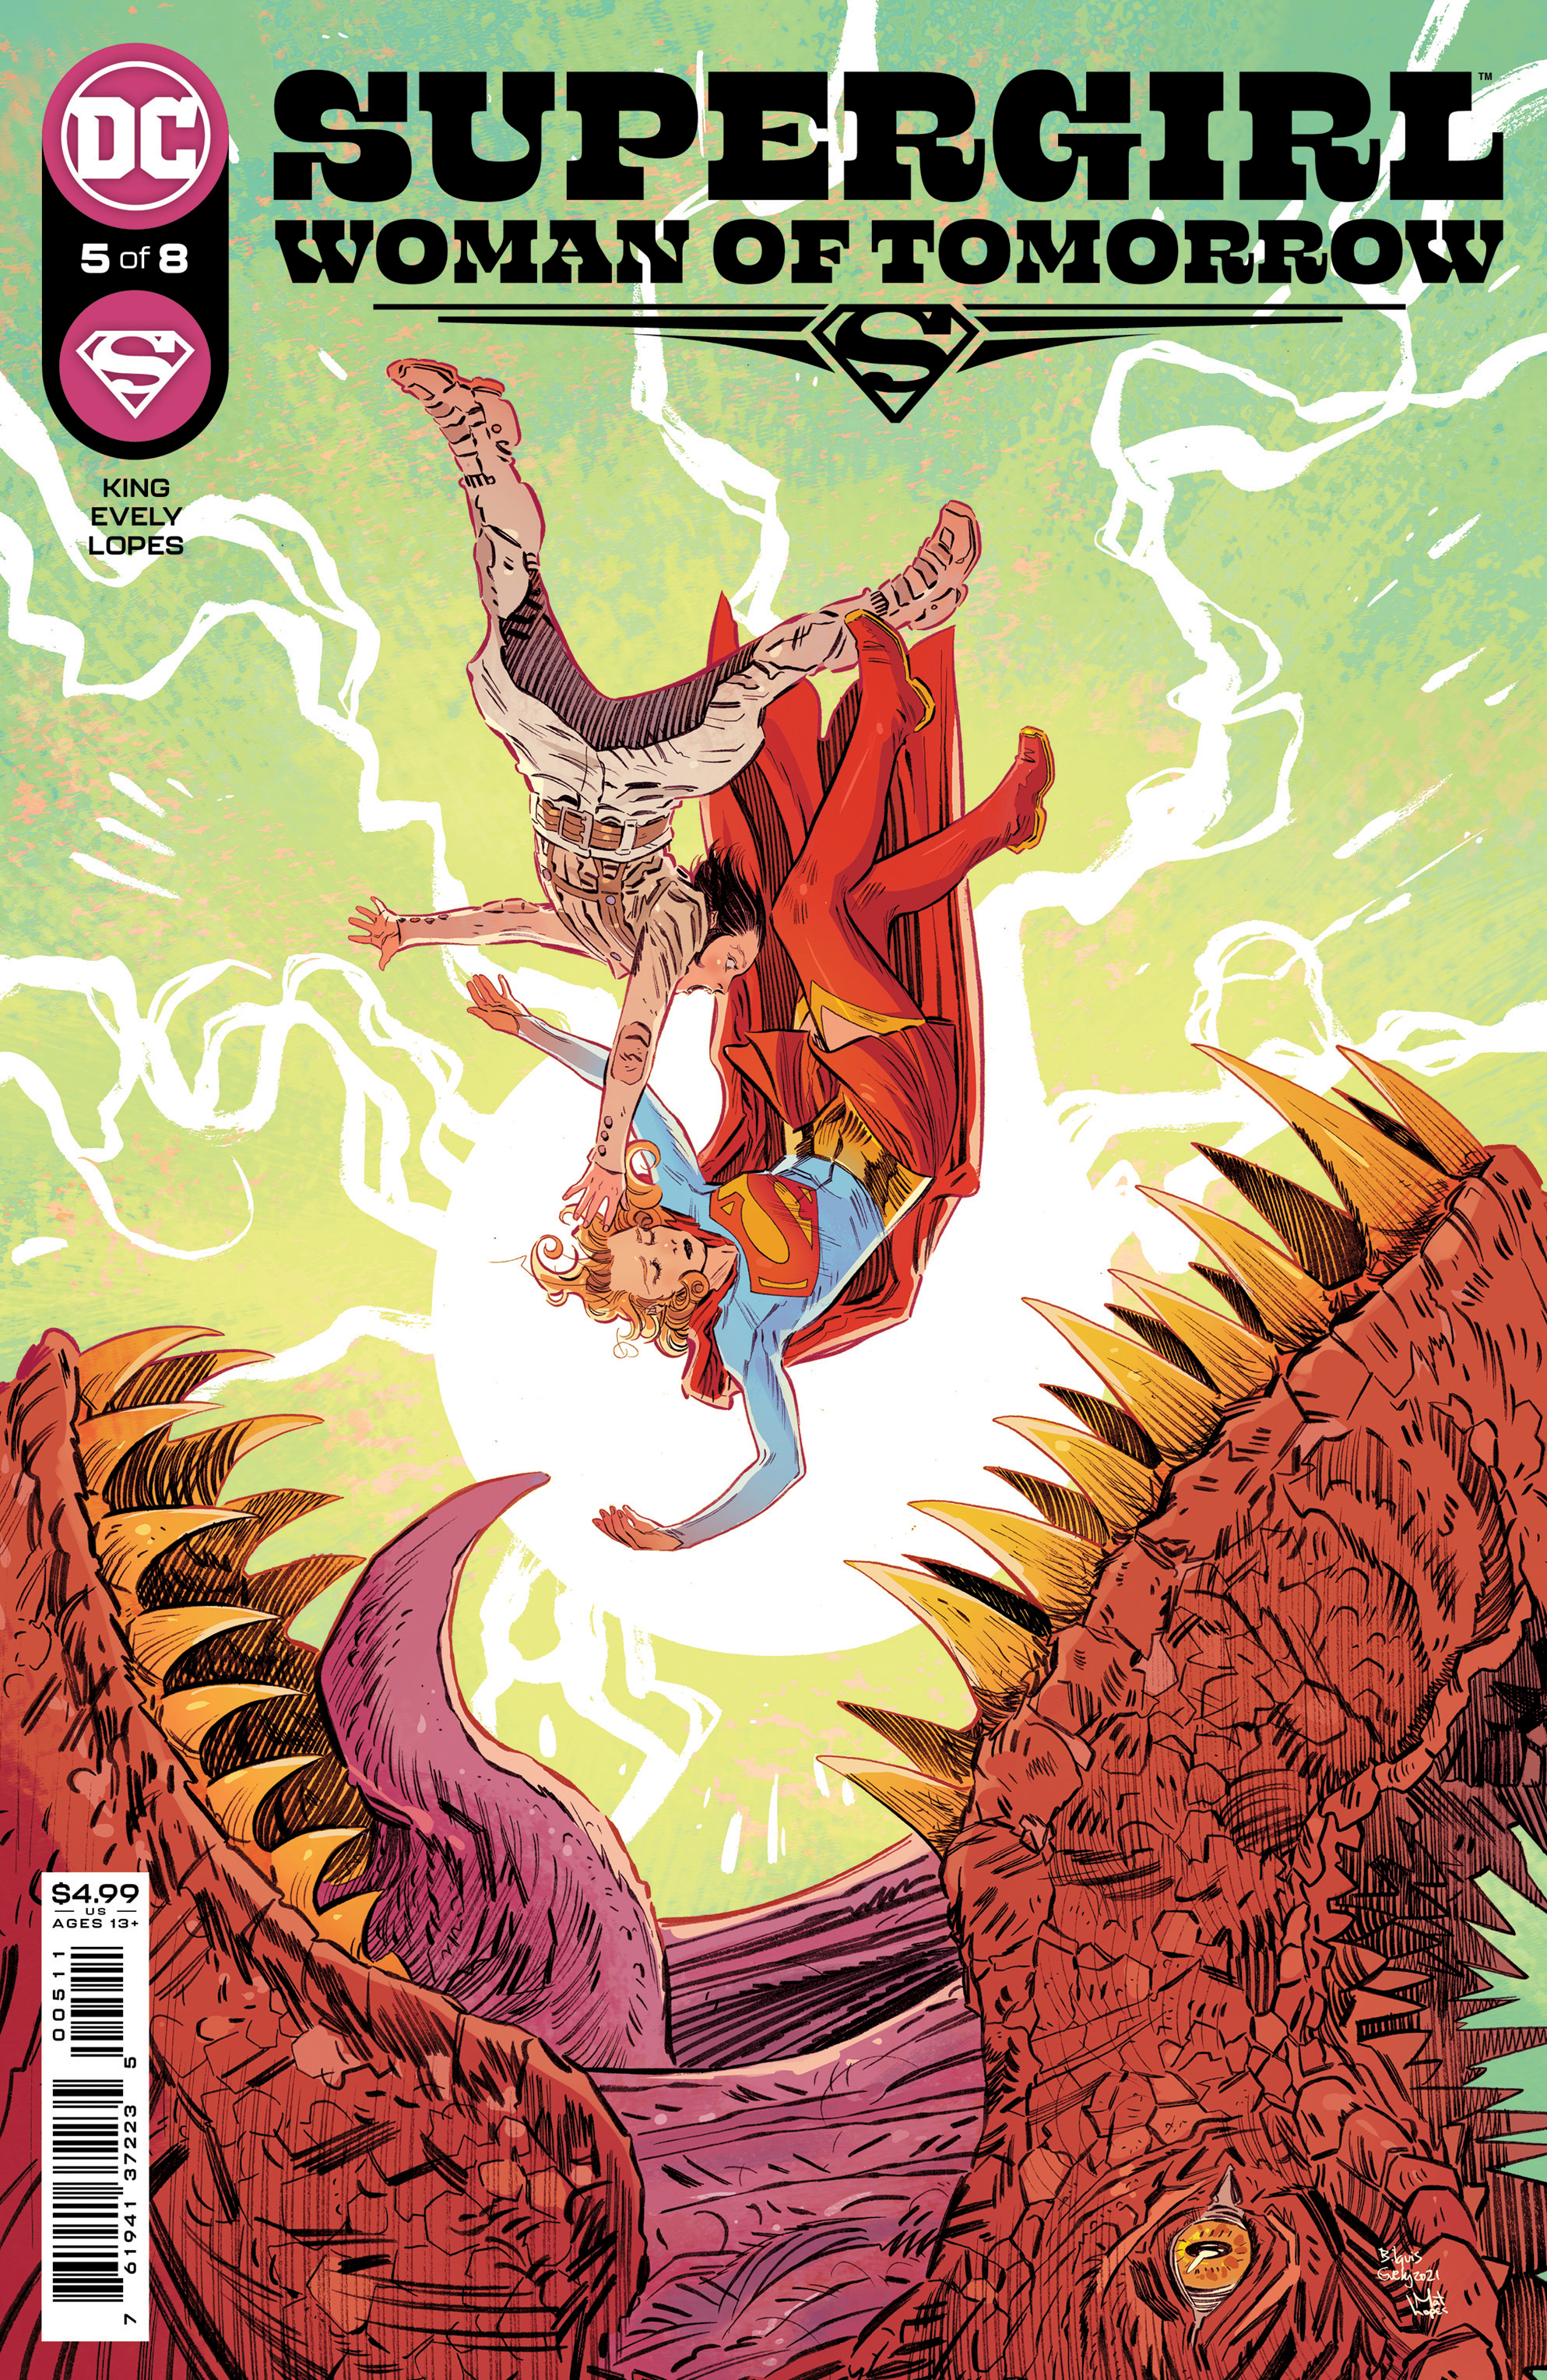 Supergirl Woman of Tomorrow #5 Cover A Bilquis Evely (Of 8)